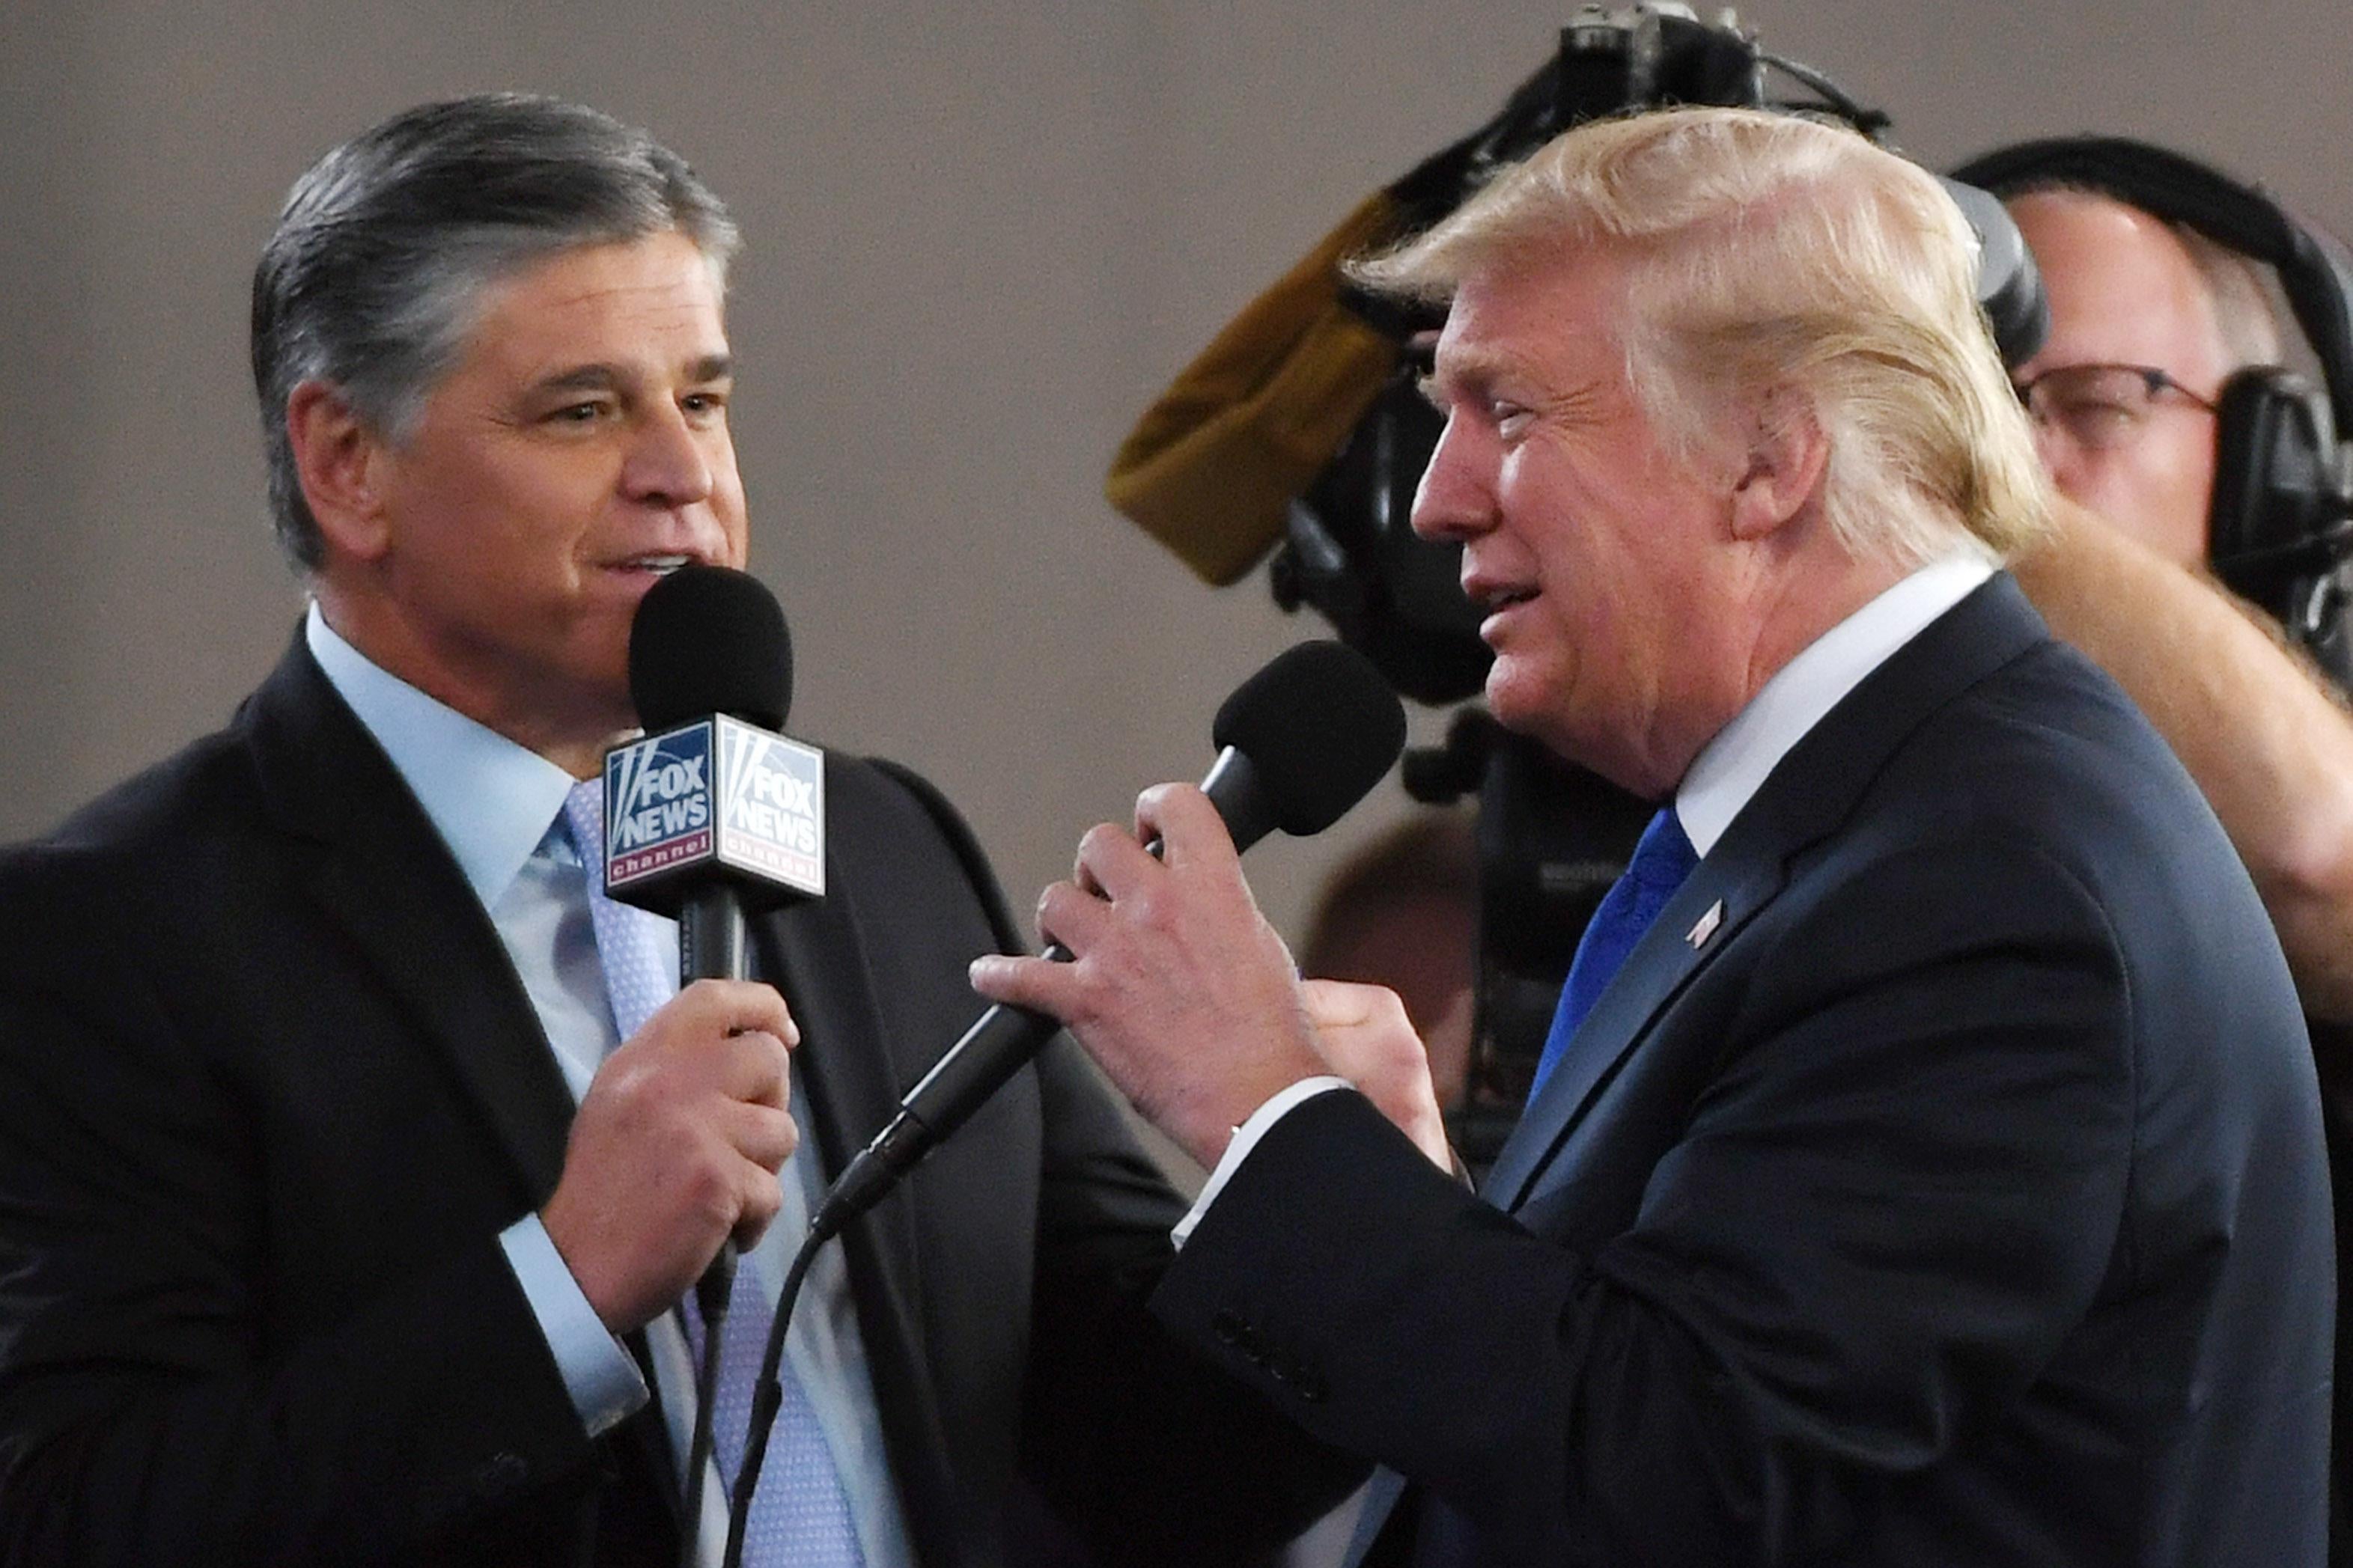 Sean Hannity interviews Trump before a campaign rally.